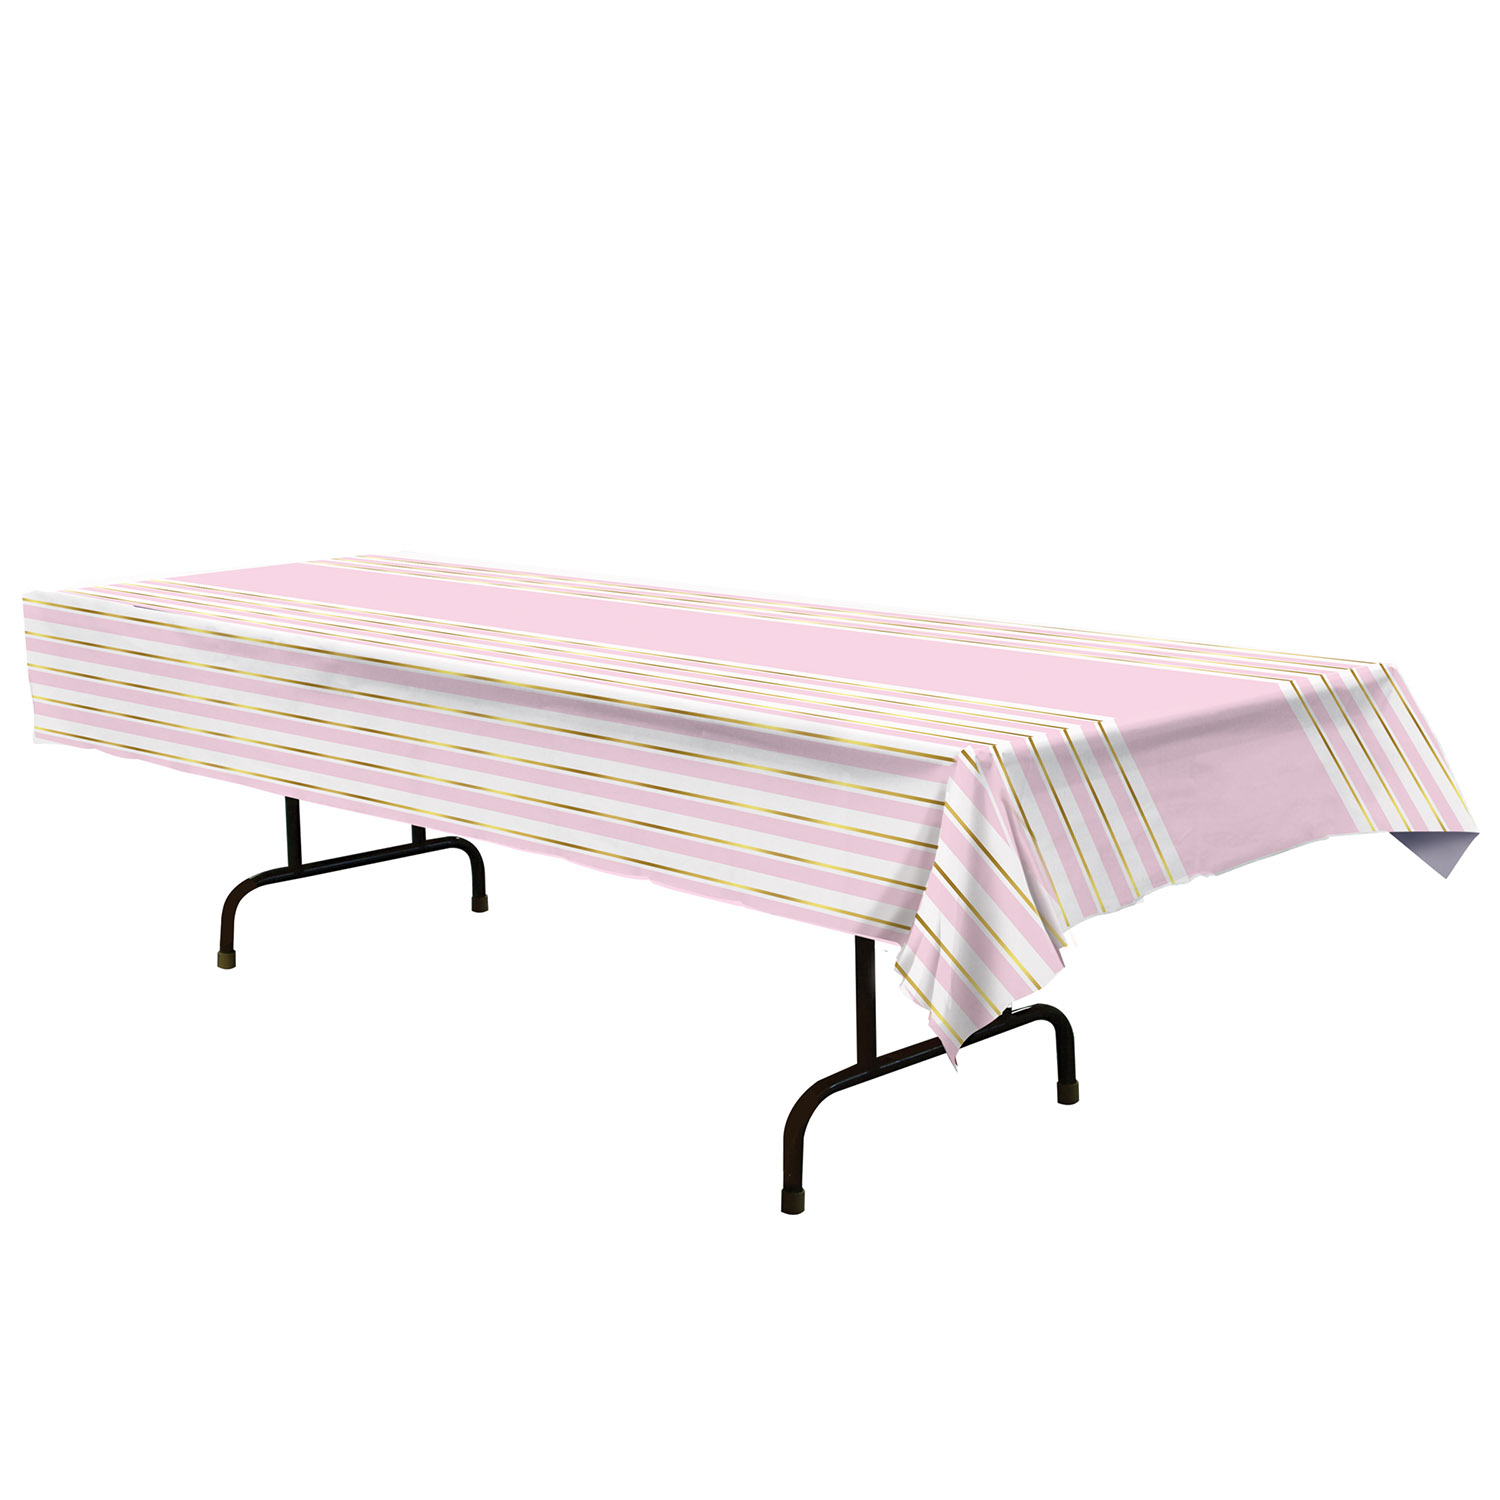 STRIPED TABLE COVER (12) image